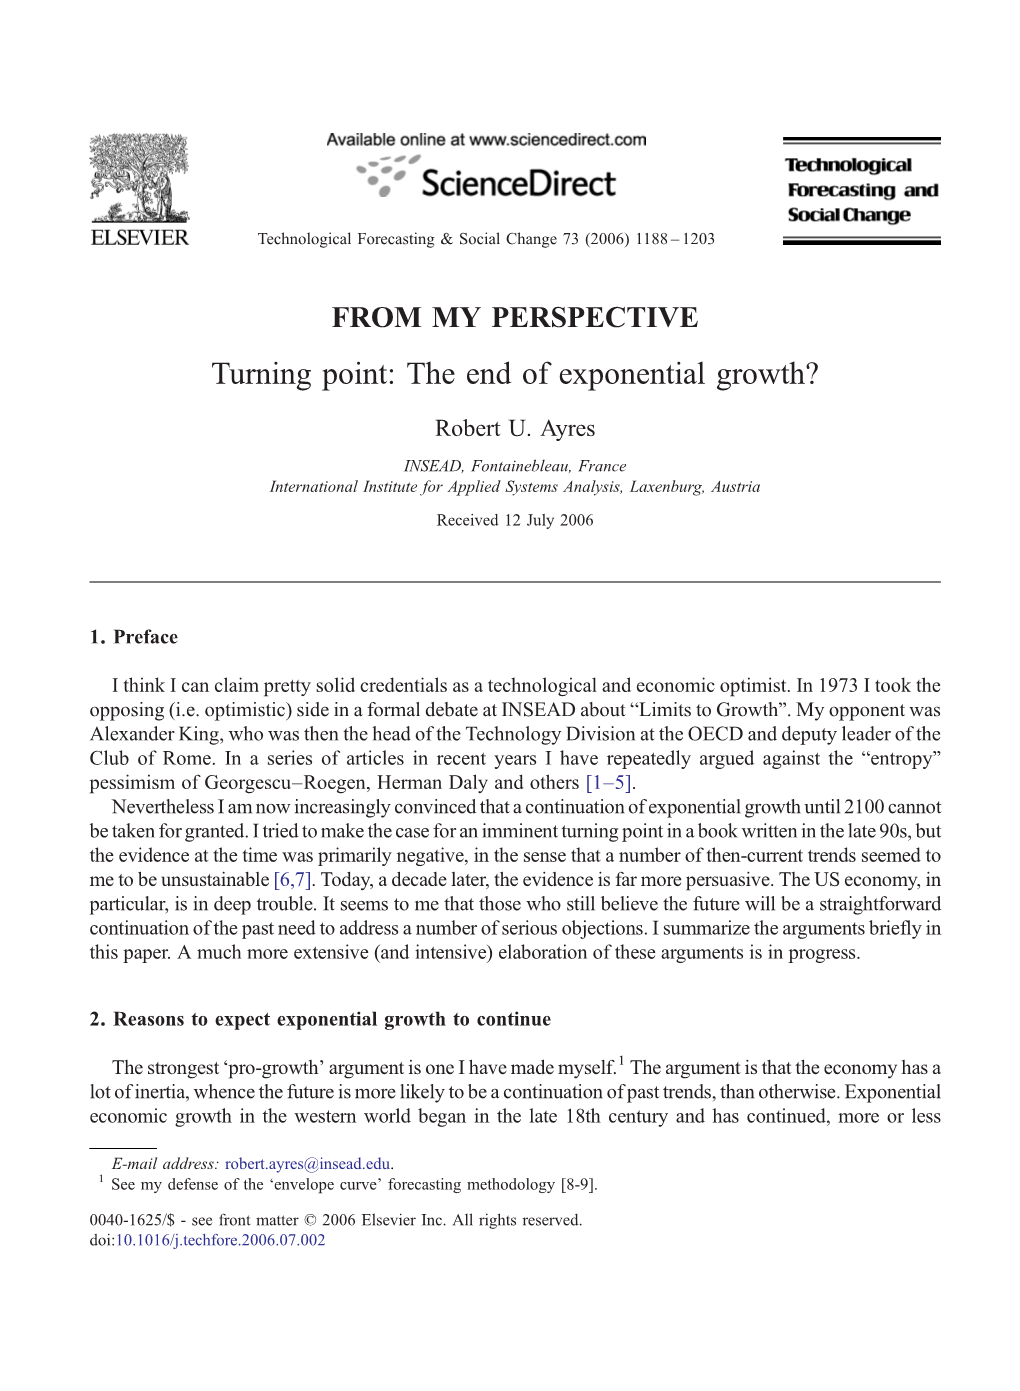 Turning Point: the End of Exponential Growth?